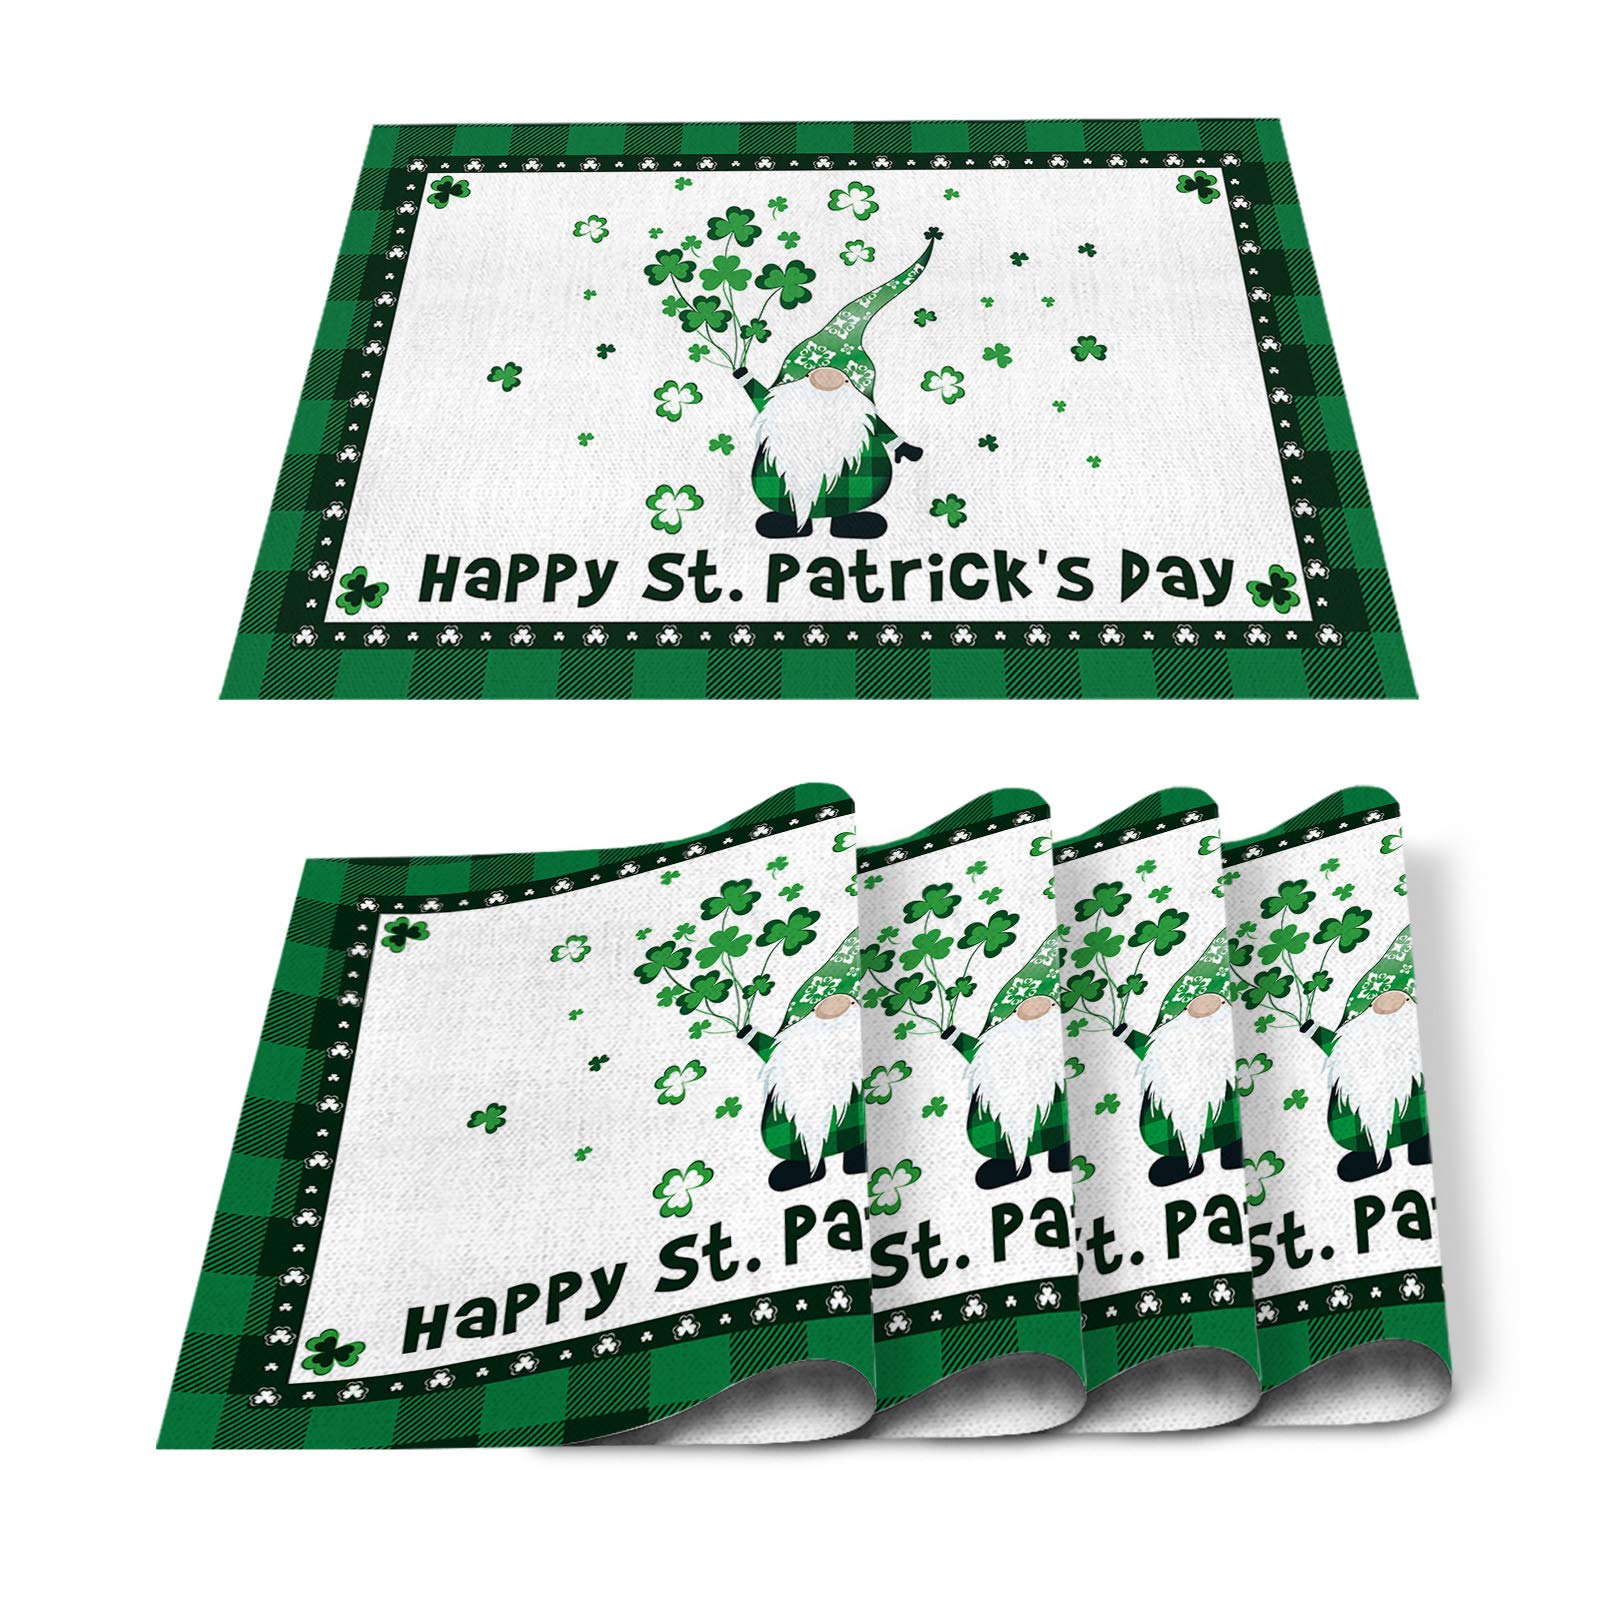 Happy St. Patrick's Day - Adorable Gnome Placemat